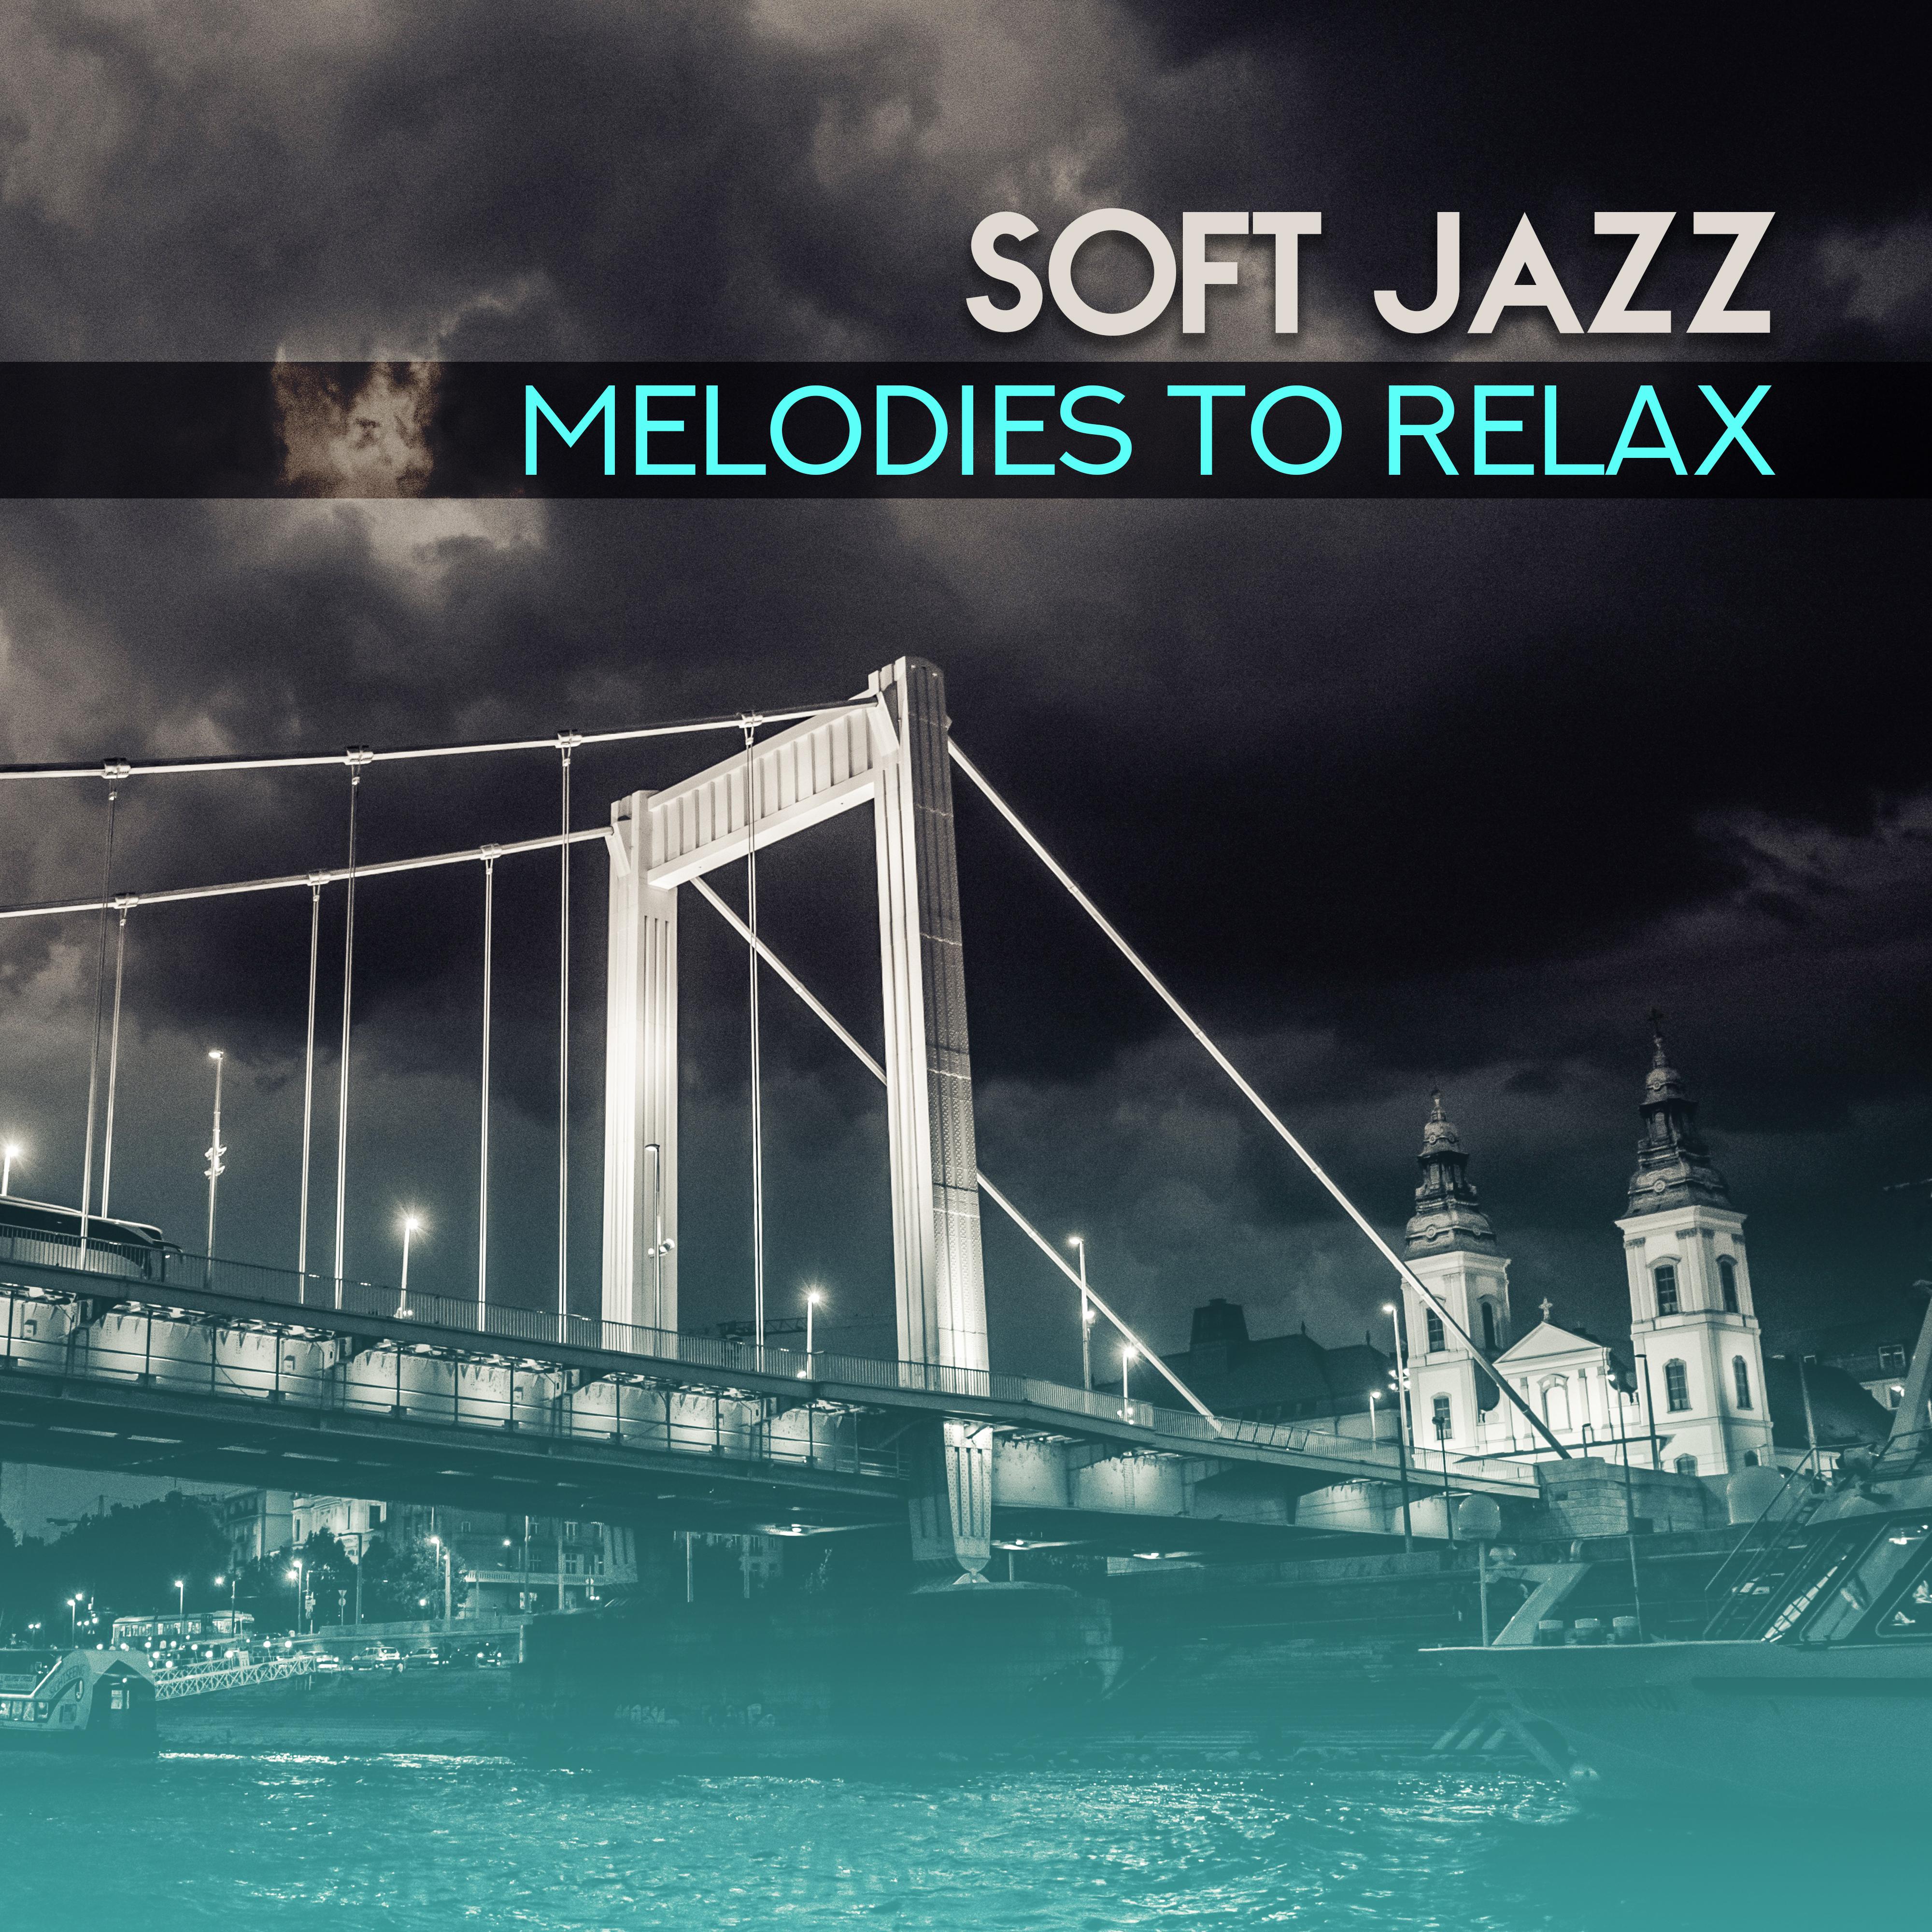 Soft Jazz Melodies to Relax – Calm Mind & Body with Jazz Sounds, Music to Rest, Easy Listening, Peaceful Melodies